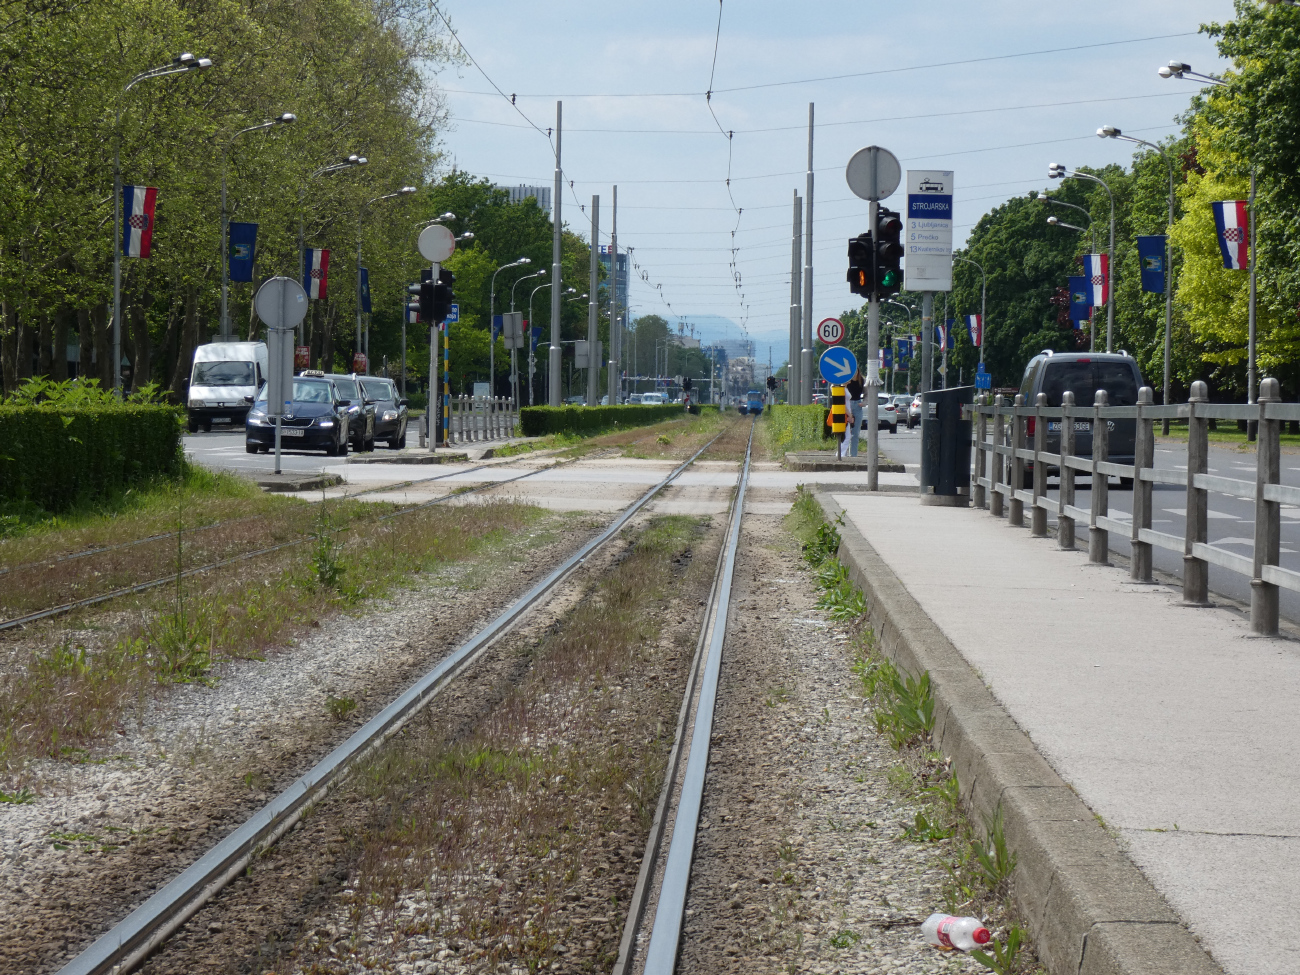 Zagreb — Tram lines and infrastructure